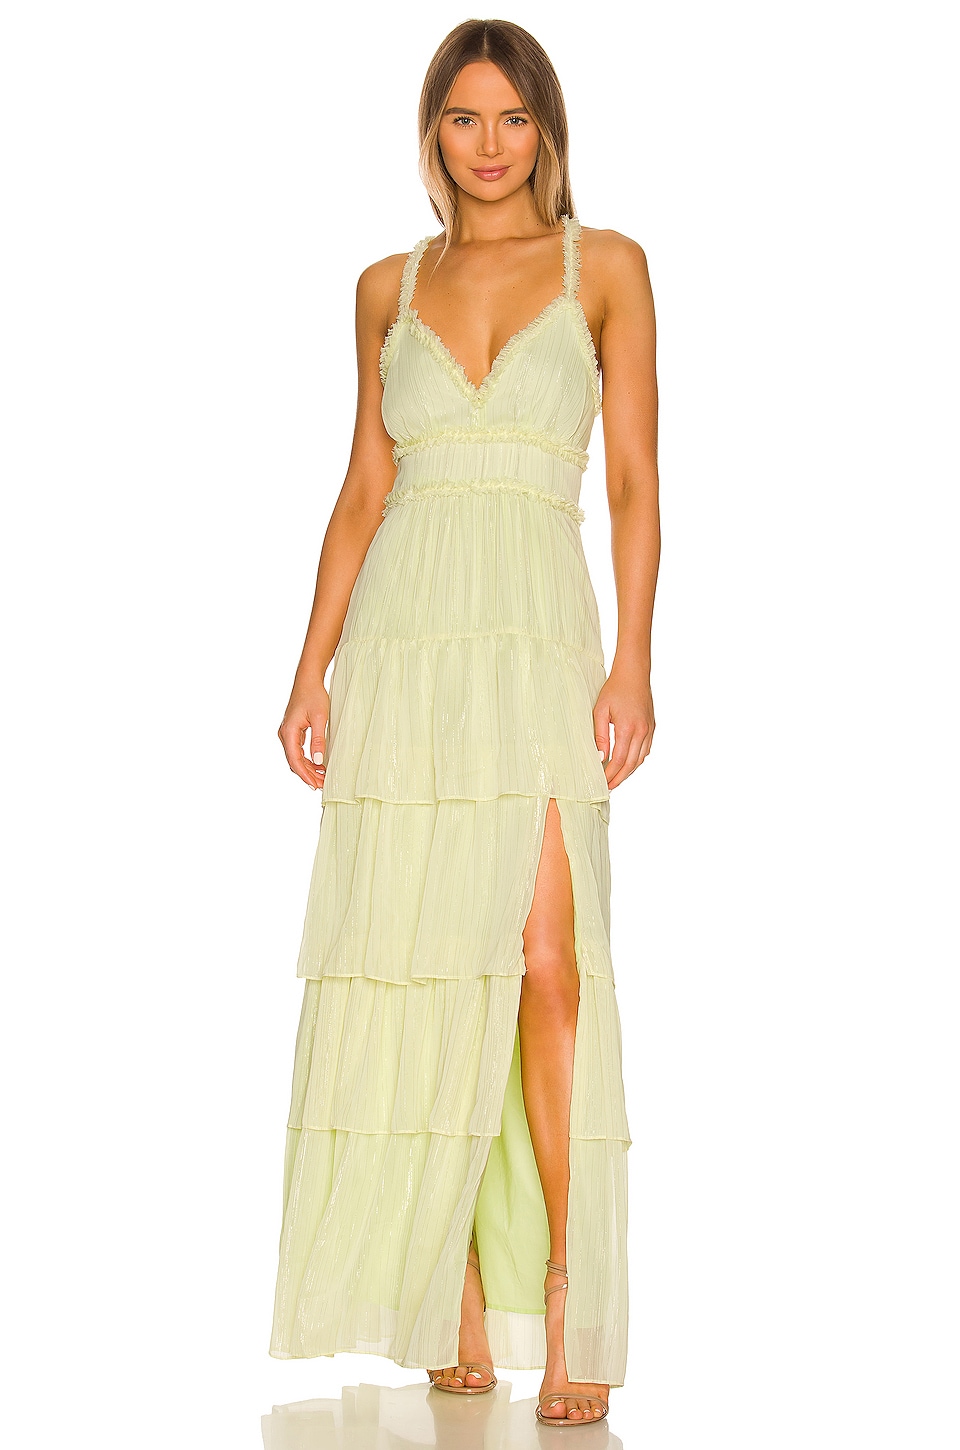 LIKELY Athena Maxi in Butterfly | REVOLVE